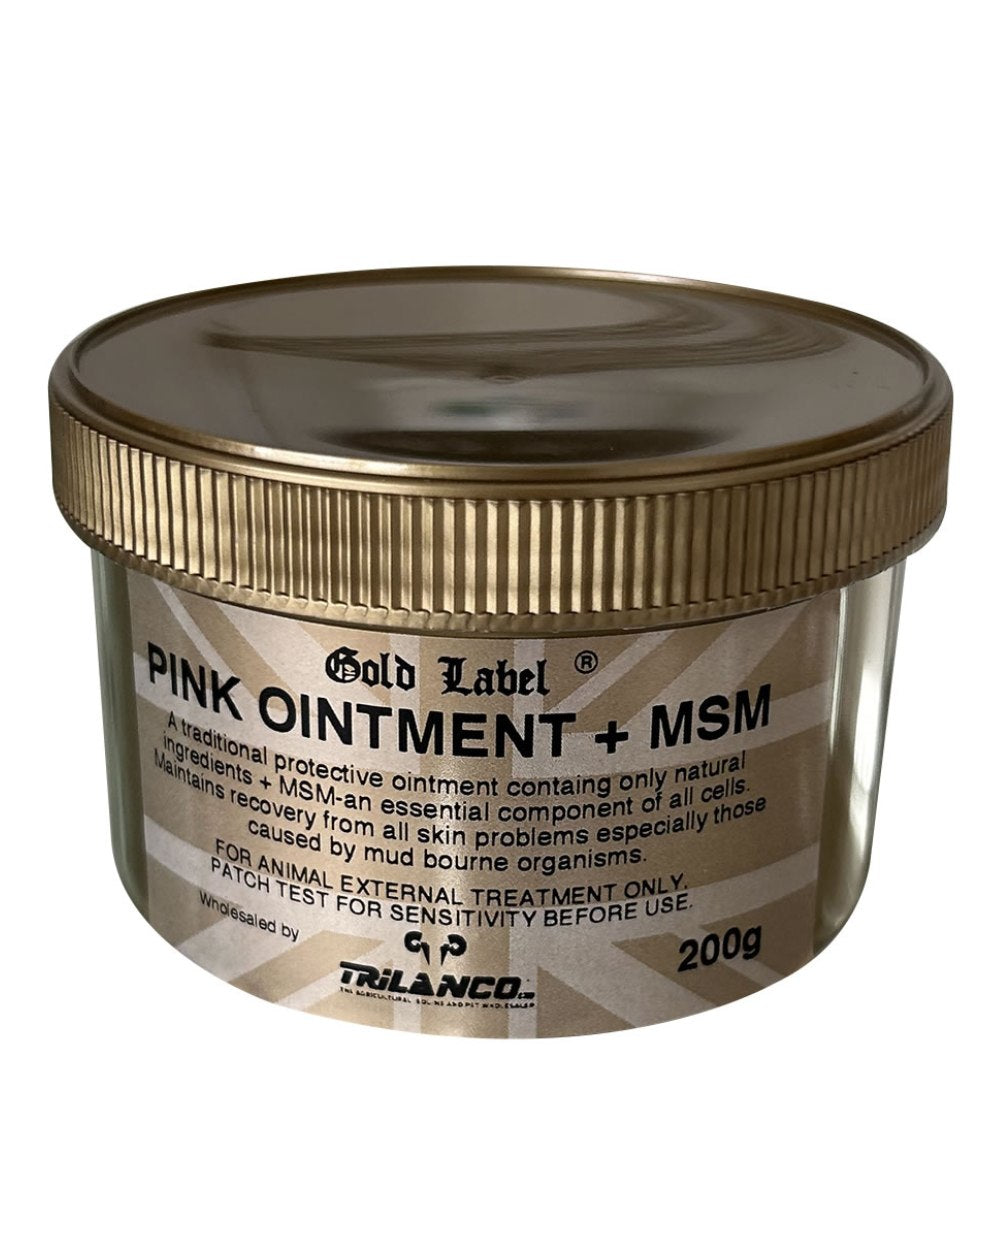 Gold Label Pink Ointment + Msm On A White Background